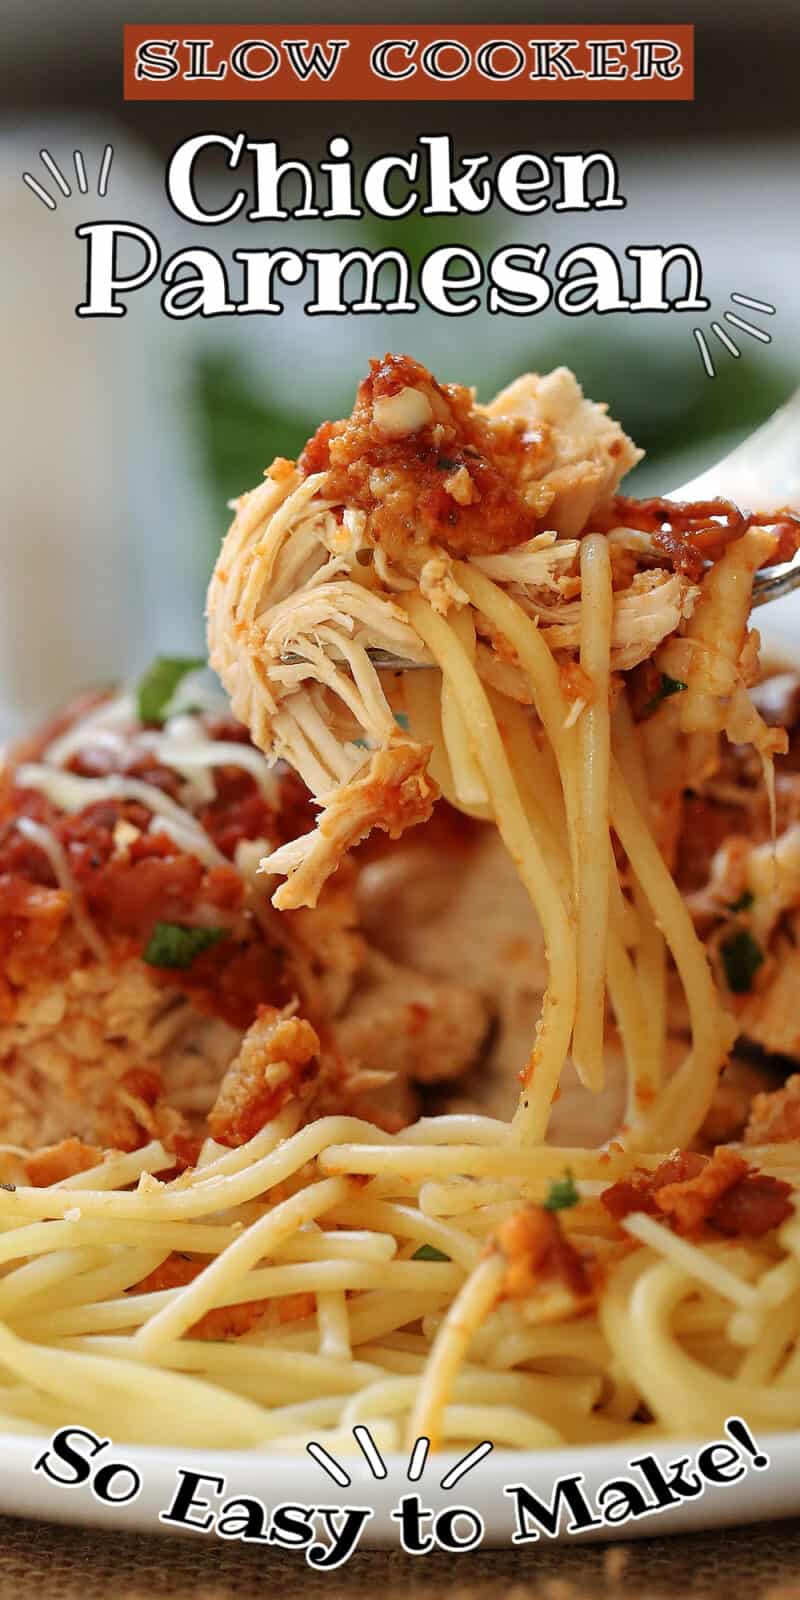 chicken parmesan and spaghetti being lifted by a fork on a plate with text